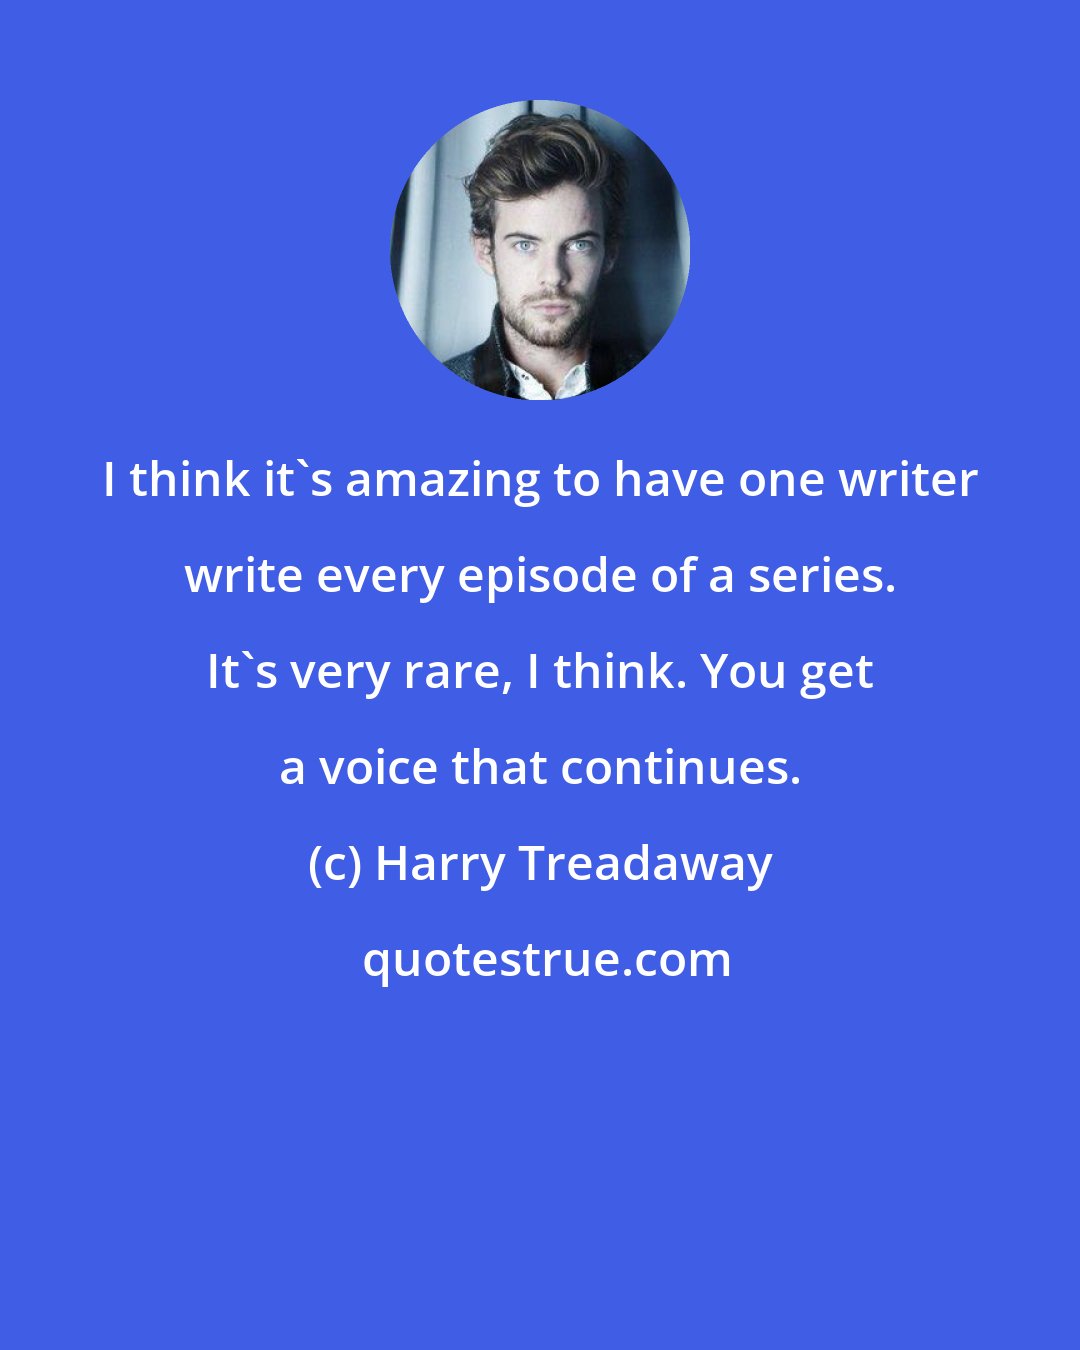 Harry Treadaway: I think it's amazing to have one writer write every episode of a series. It's very rare, I think. You get a voice that continues.